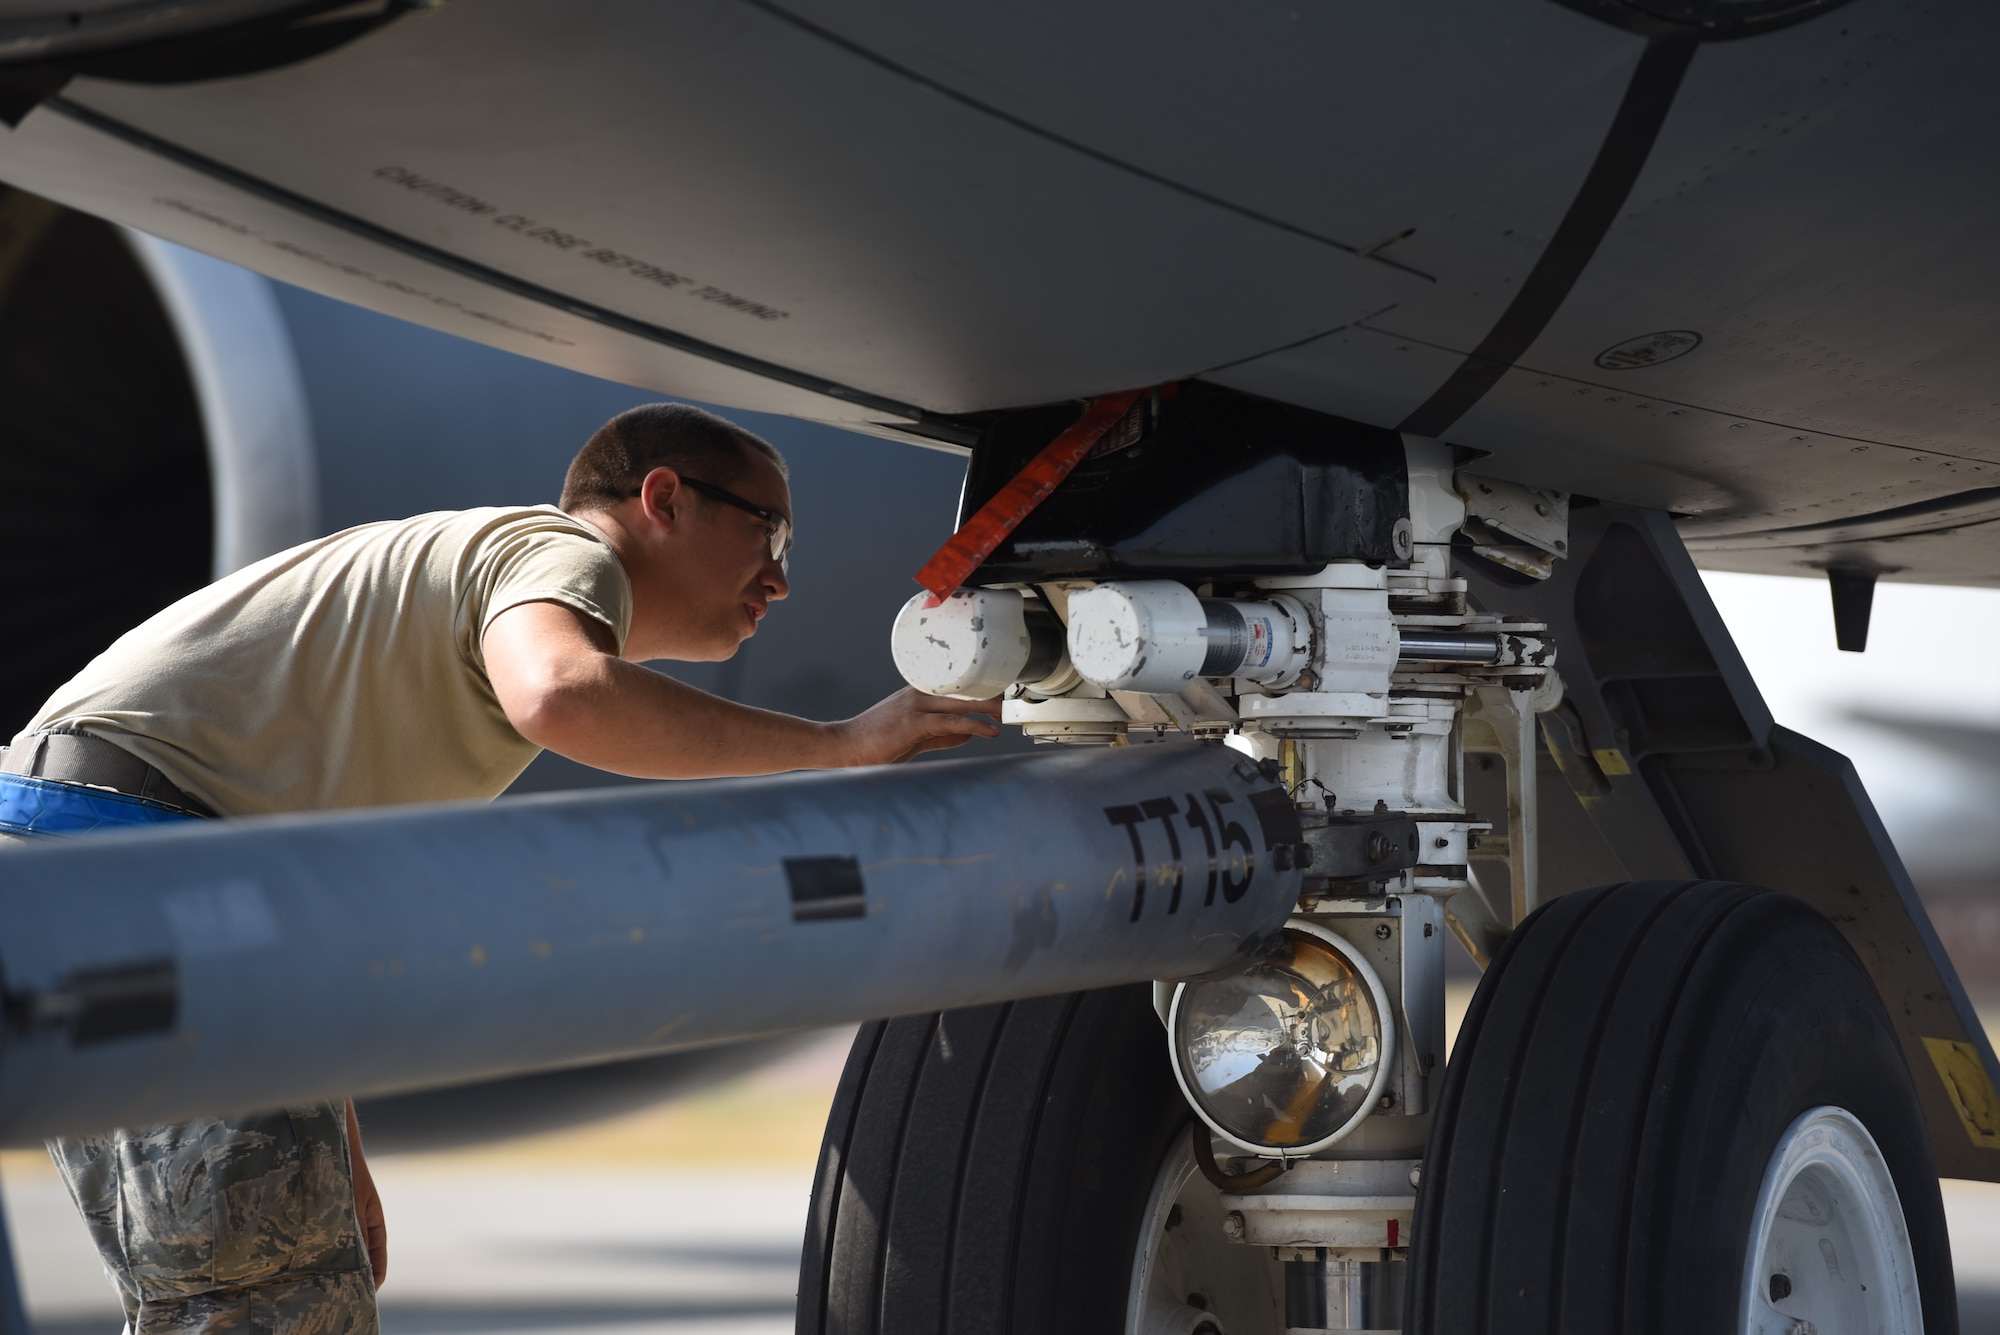 Senior Airman Tyler Turoczy, 92nd Maintenance Squadron crew chief, checks the axle of a KC-135 Stratotanker assigned to the 92nd Air Refueling Wing, Aug. 22, 2018, at Fairchild Air Force Base, Washington. Titan Fury is a readiness exercise used to validate and enhance Fairchild Airmen’s ability to provide Rapid Global Mobility as required by the U.S. Strategic Command and U.S. Transportation Command. (U.S. Air Force photo by Airman 1st Class Lawrence Sena)